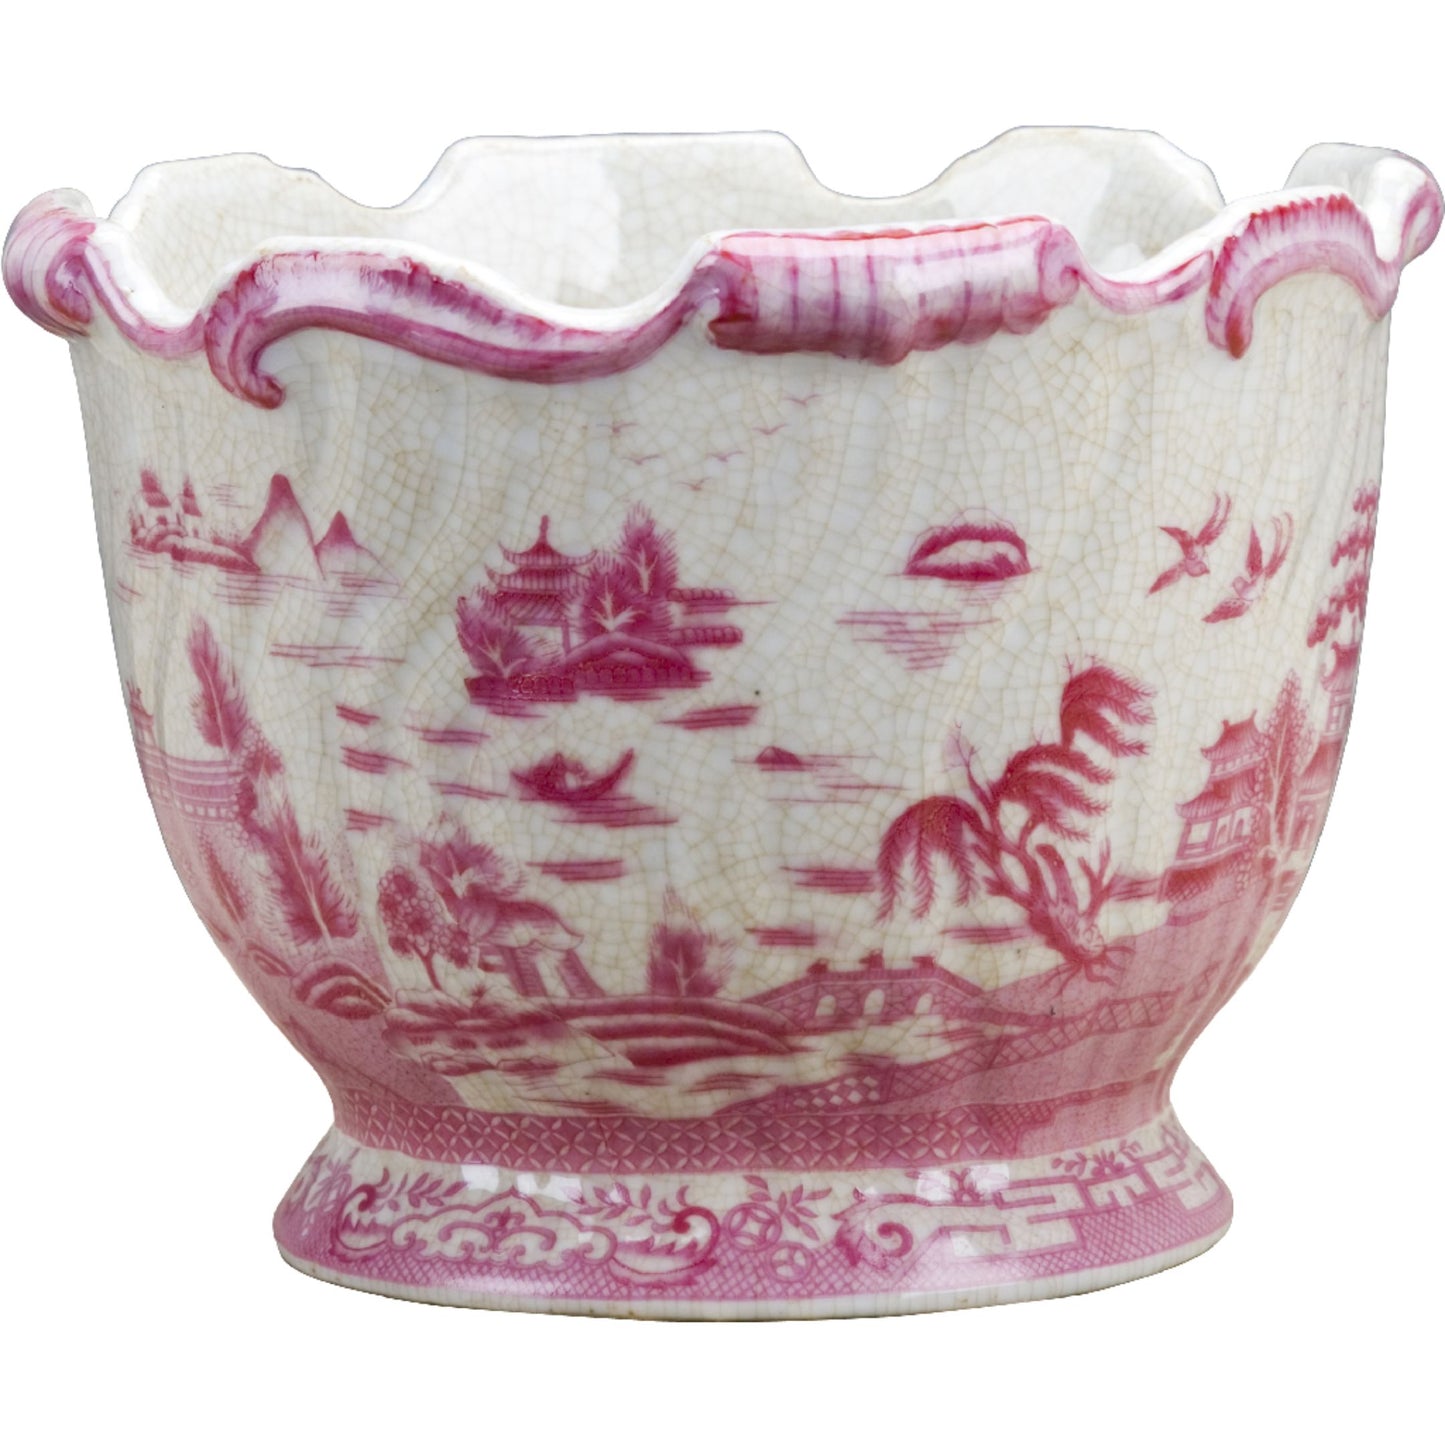 NEW - Pink/White Porcelain Willow Footed Planter, 6" Tall